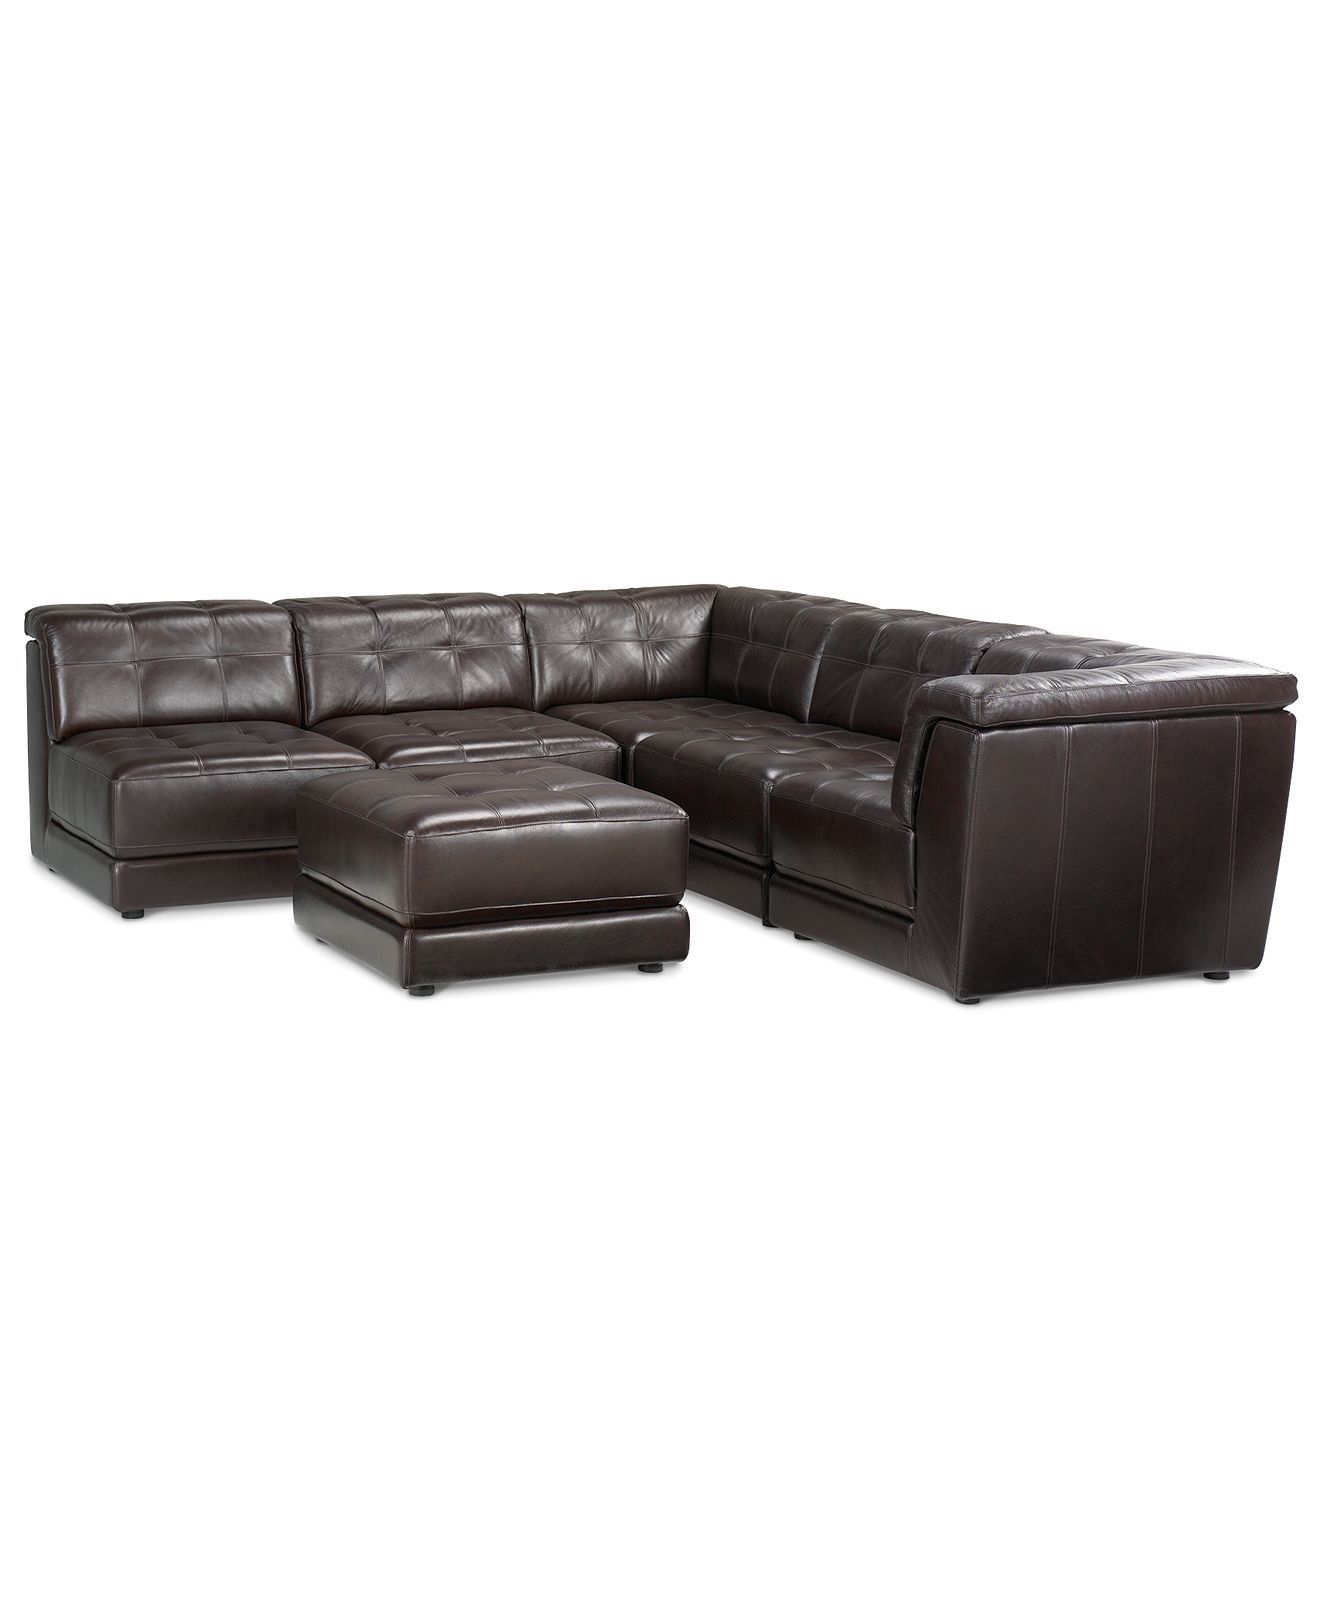 Macy's Stacey Leather Sectional Sofa, 6 Piece Modular (3 Armless In Macys Leather Sectional Sofas (View 3 of 10)